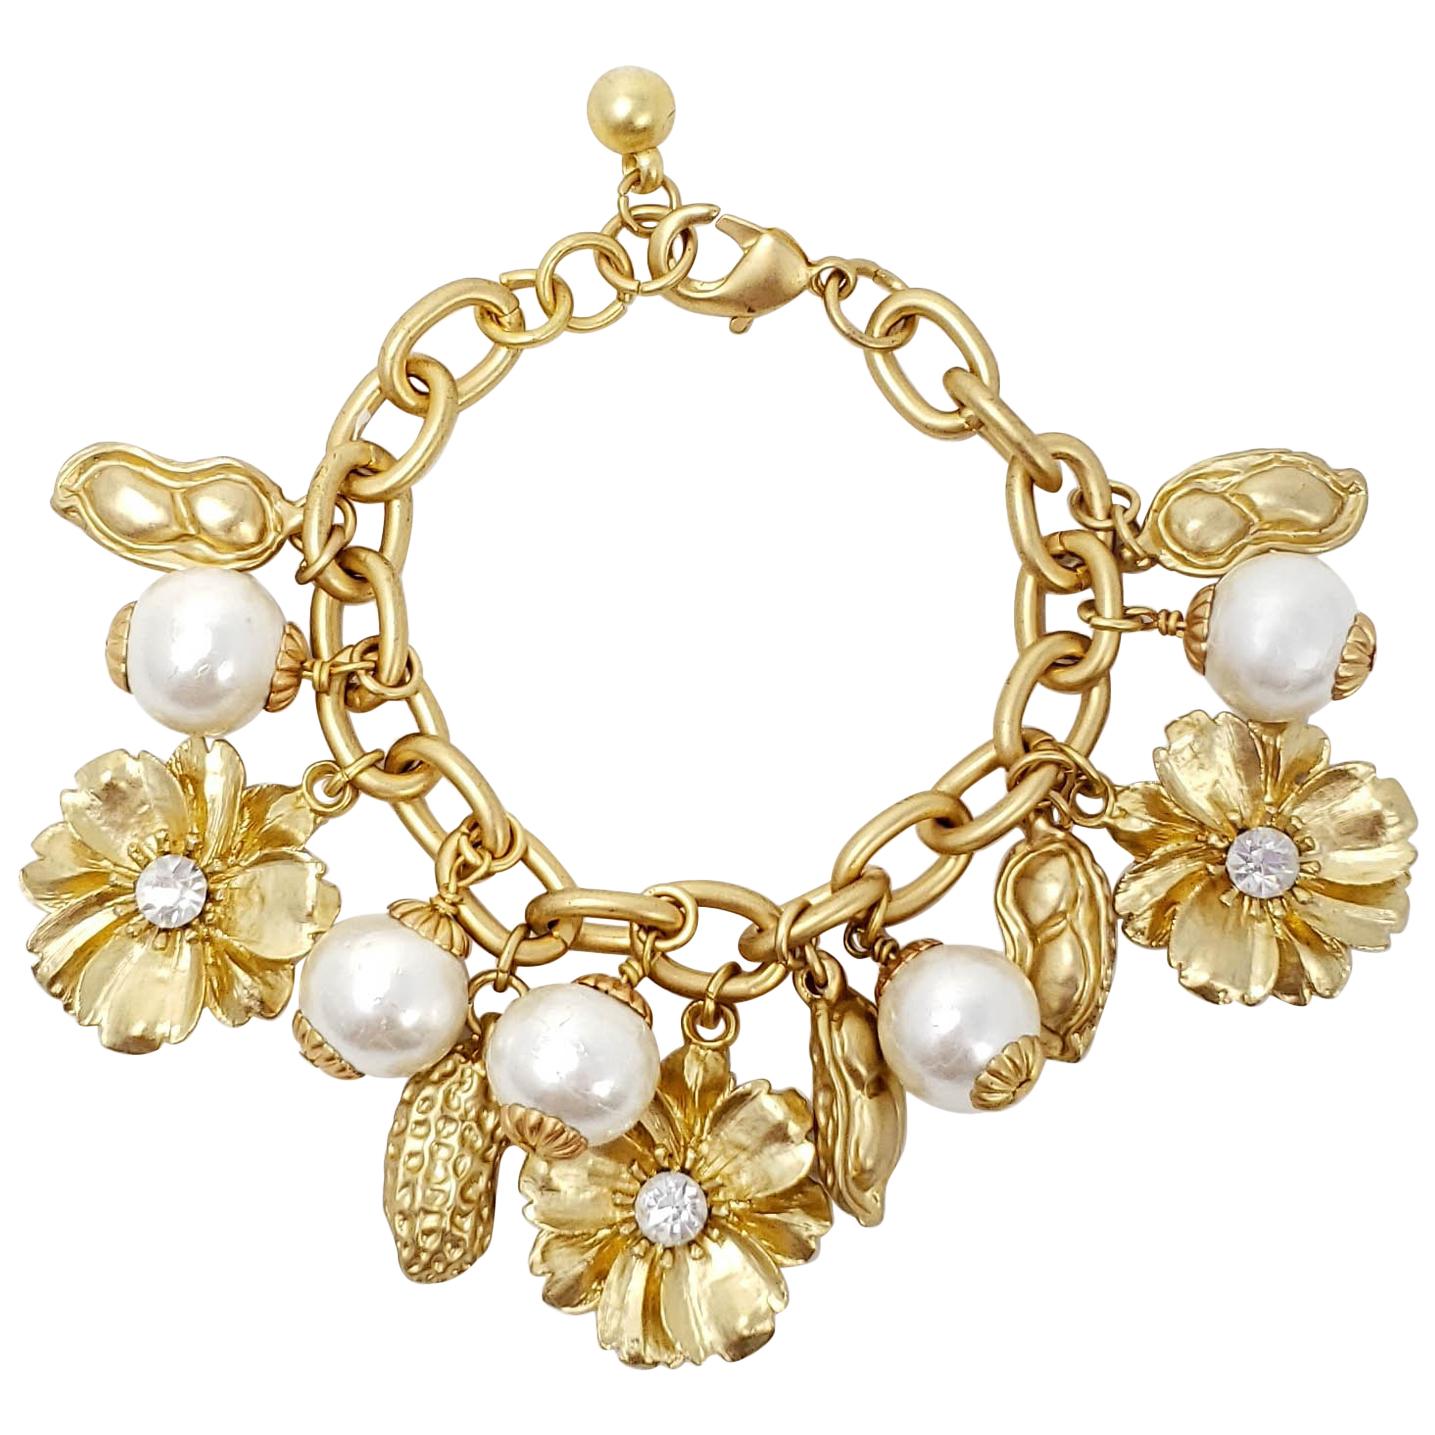 Peanut, Flower, and Faux Pearl Charm Chain Bracelet in Gold, Mid to Late 1900s